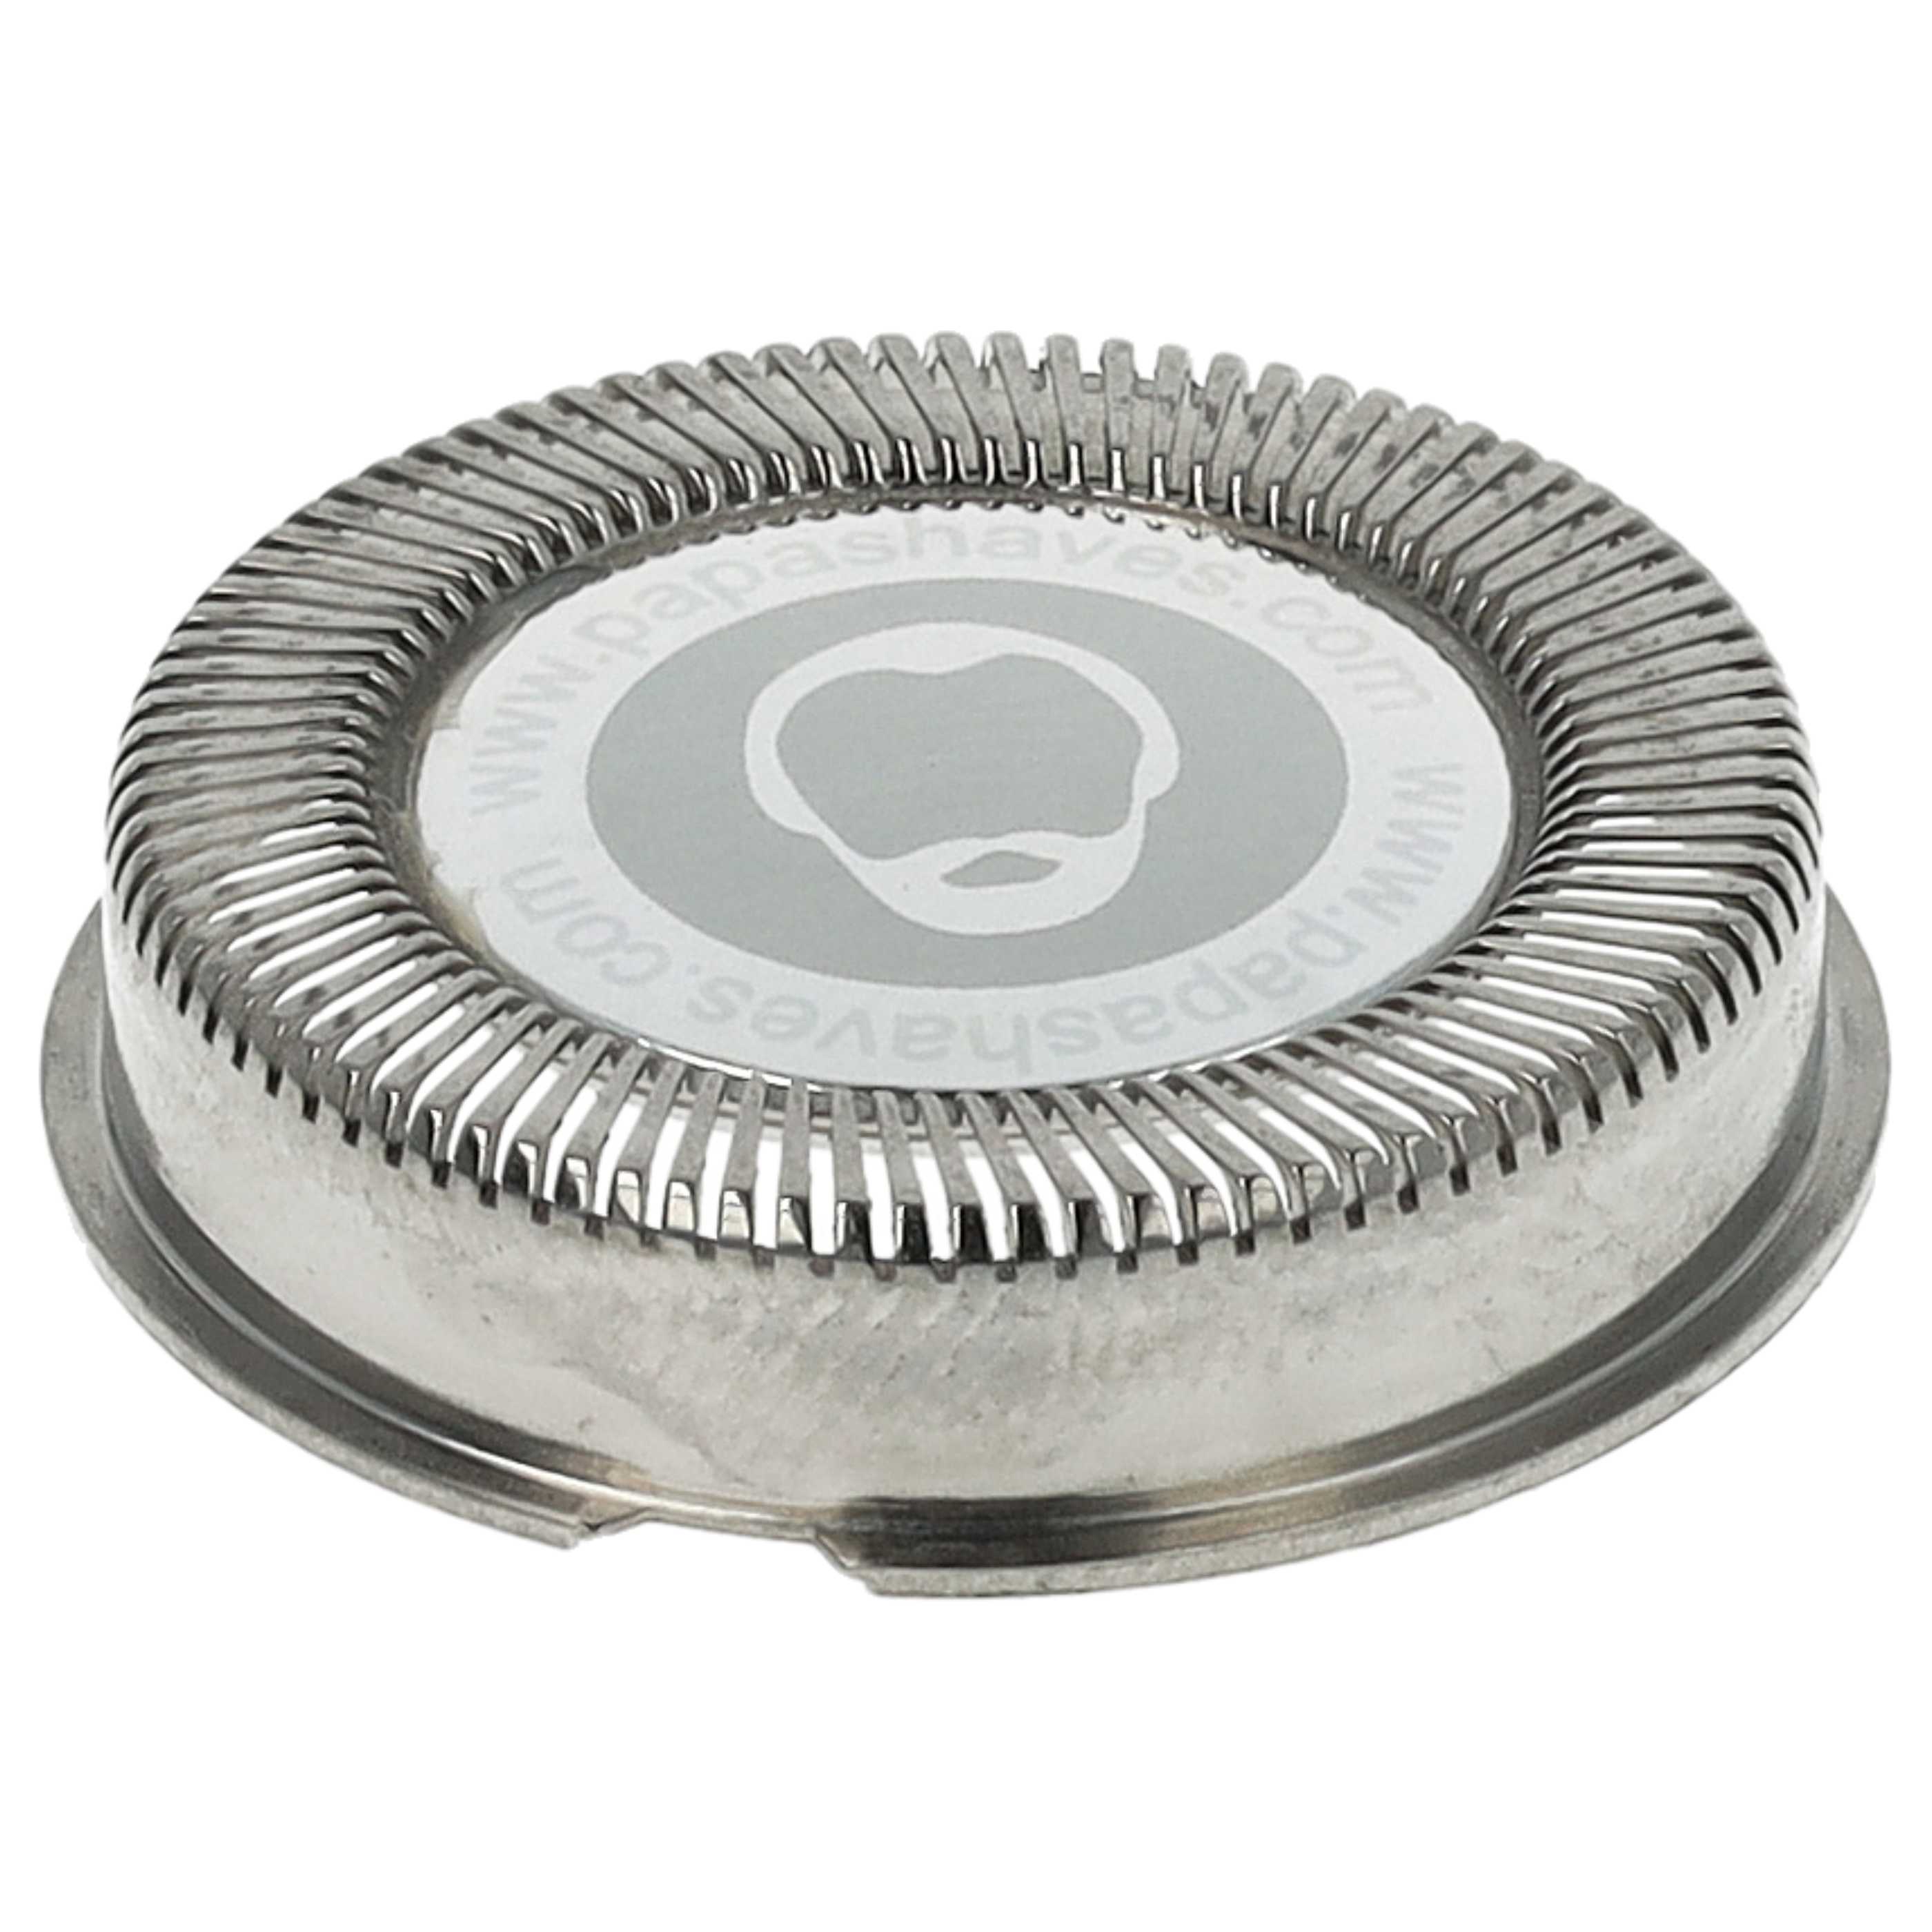 6x shaving head as Replacement for Philips HQ8/53, HQ8/5 for Philips Shaver - Stainless Steel